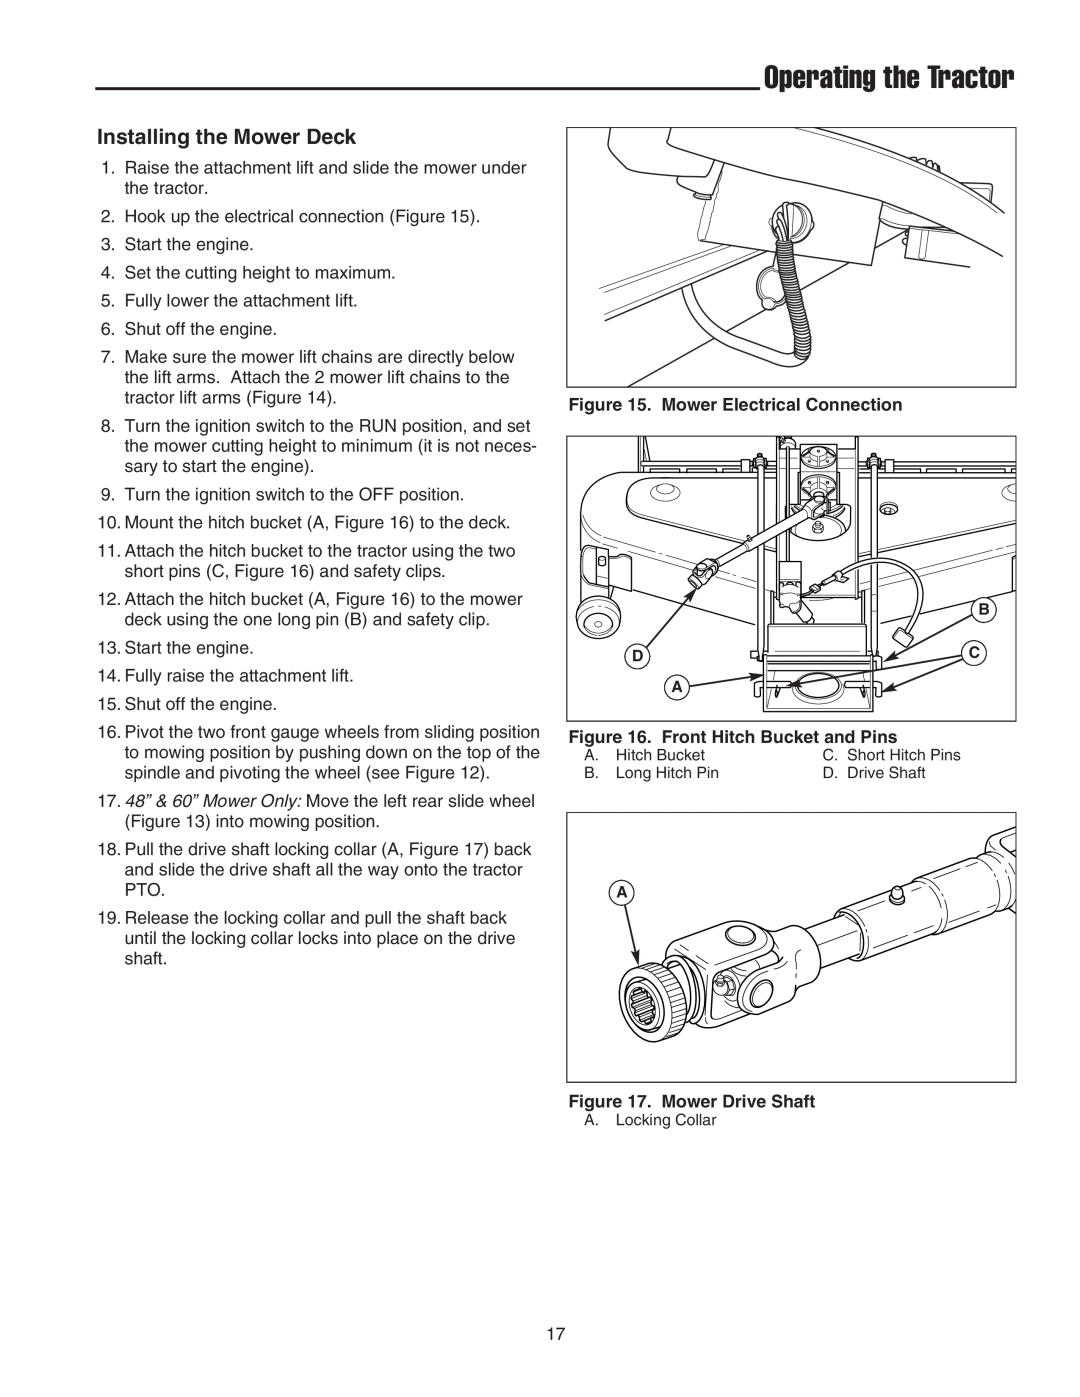 Simplicity 1693112 Installing the Mower Deck, Operating the Tractor, Mower Electrical Connection, Mower Drive Shaft 